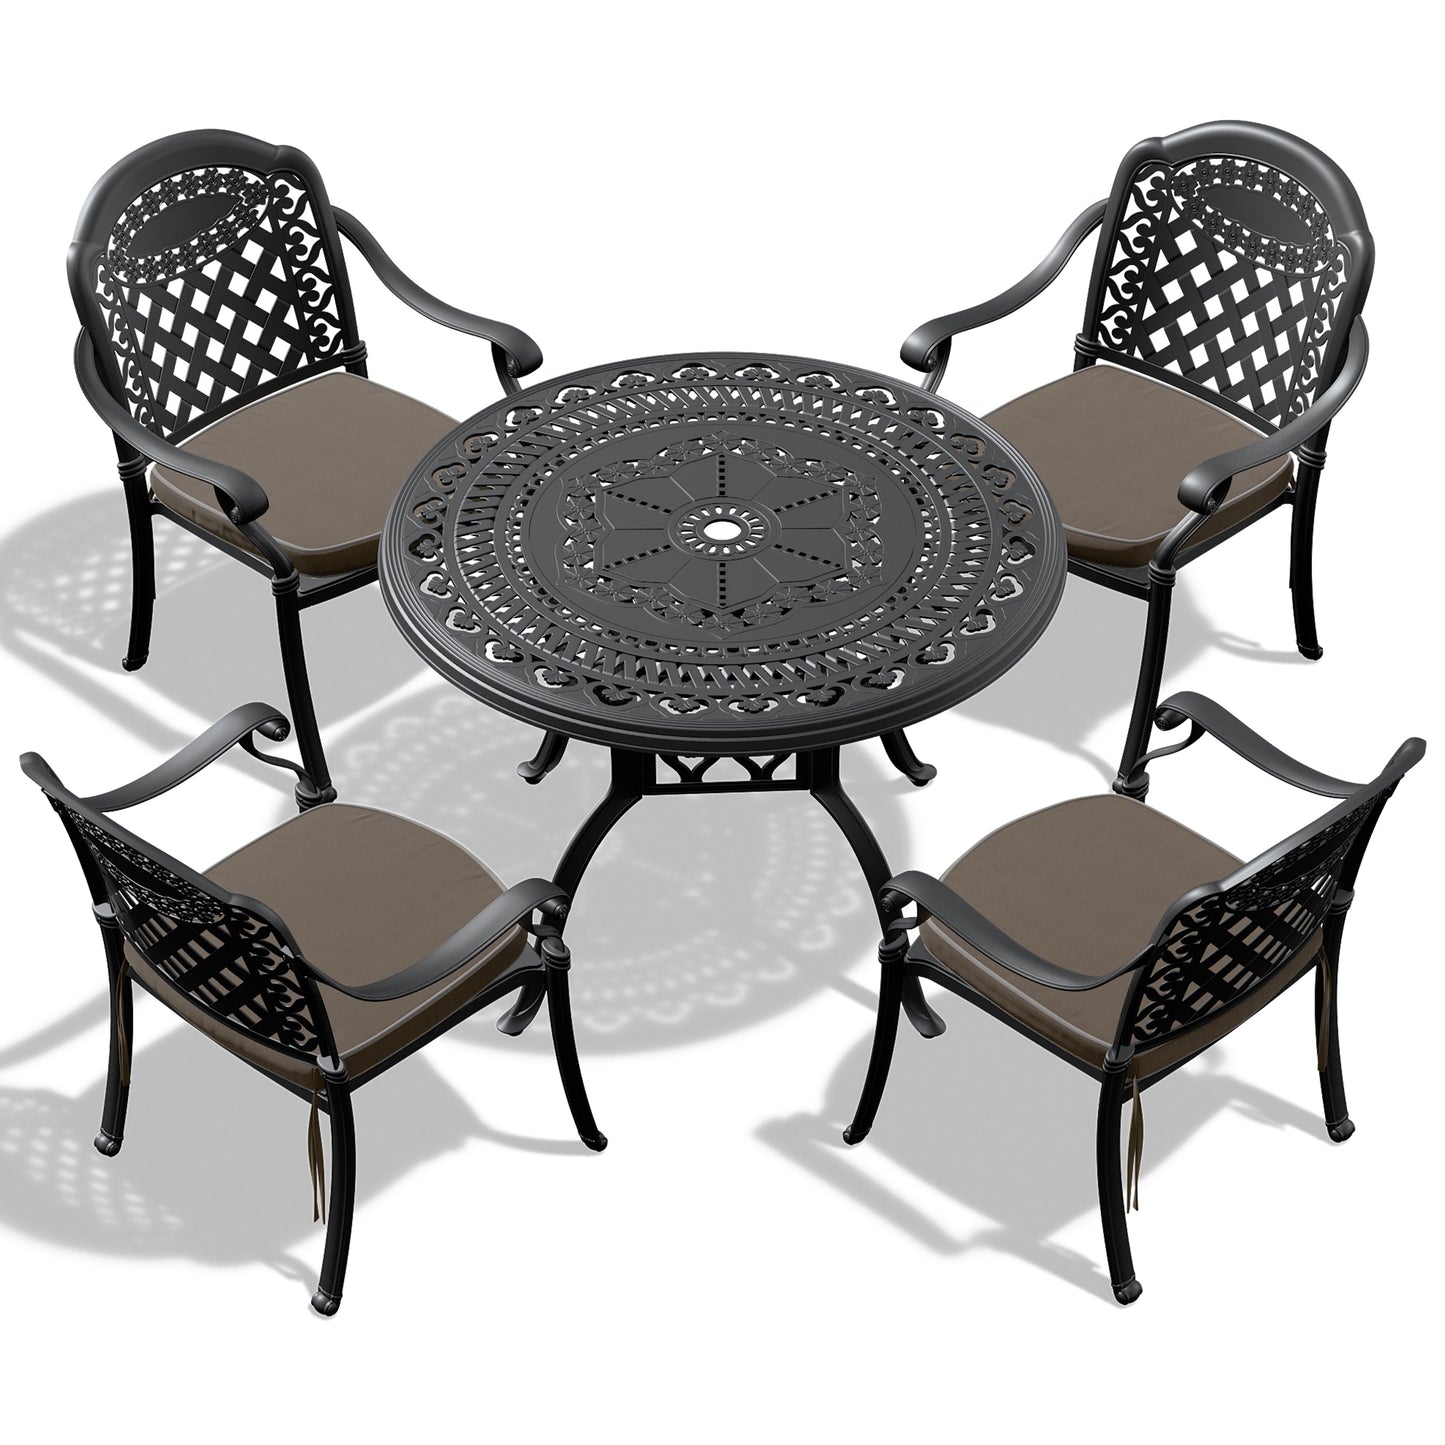 7-Piece Set Of Cast Aluminum Patio Furniture  With Black Frame and  Seat Cushions In Random Colors